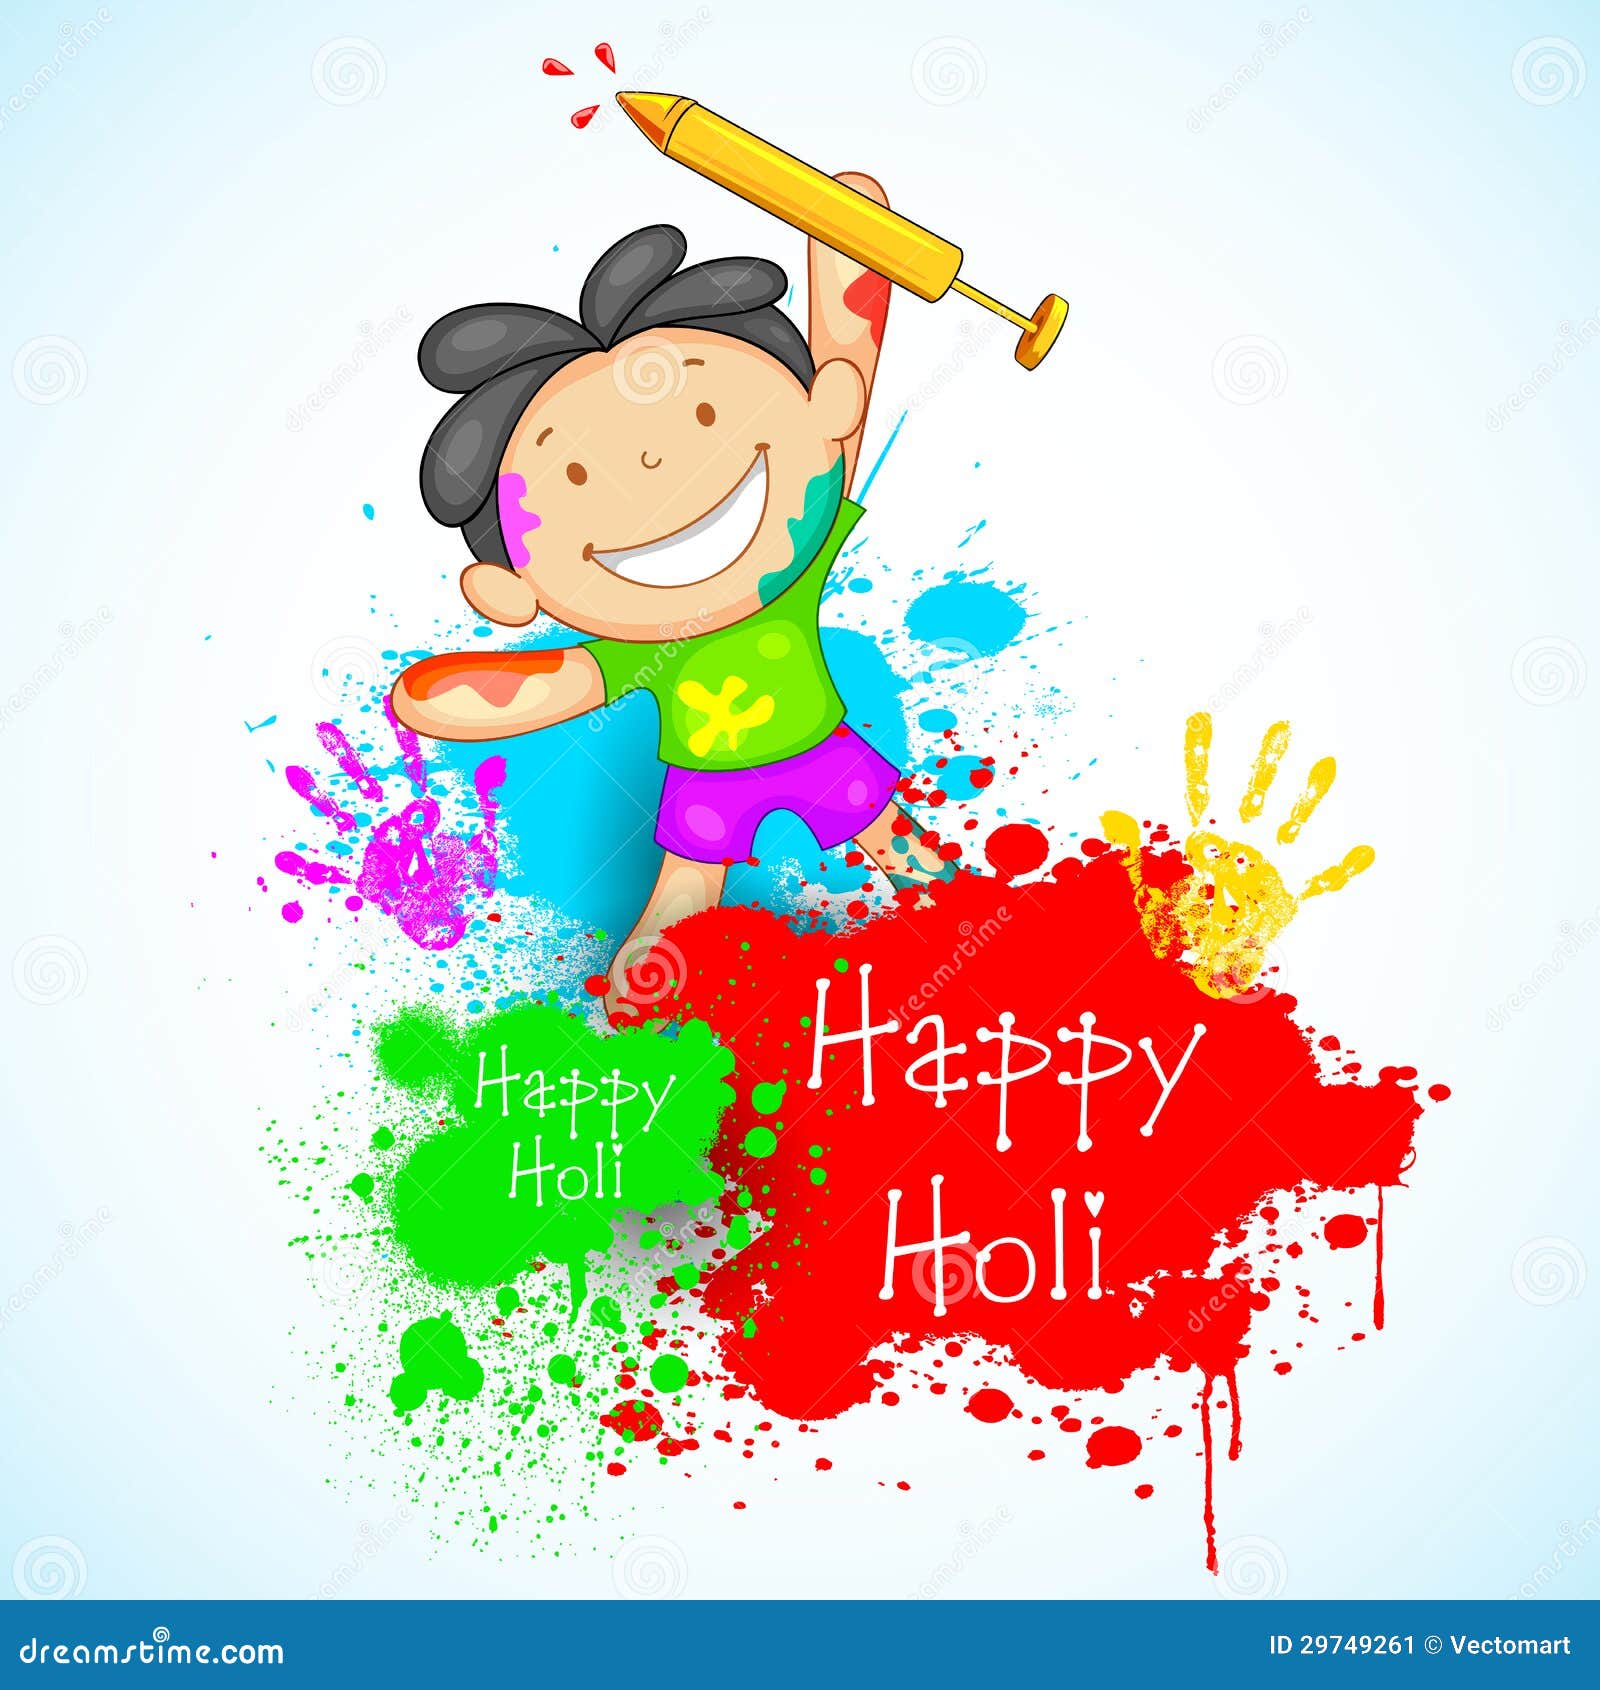 Holi Festival Colouring Poster | Teaching Resources